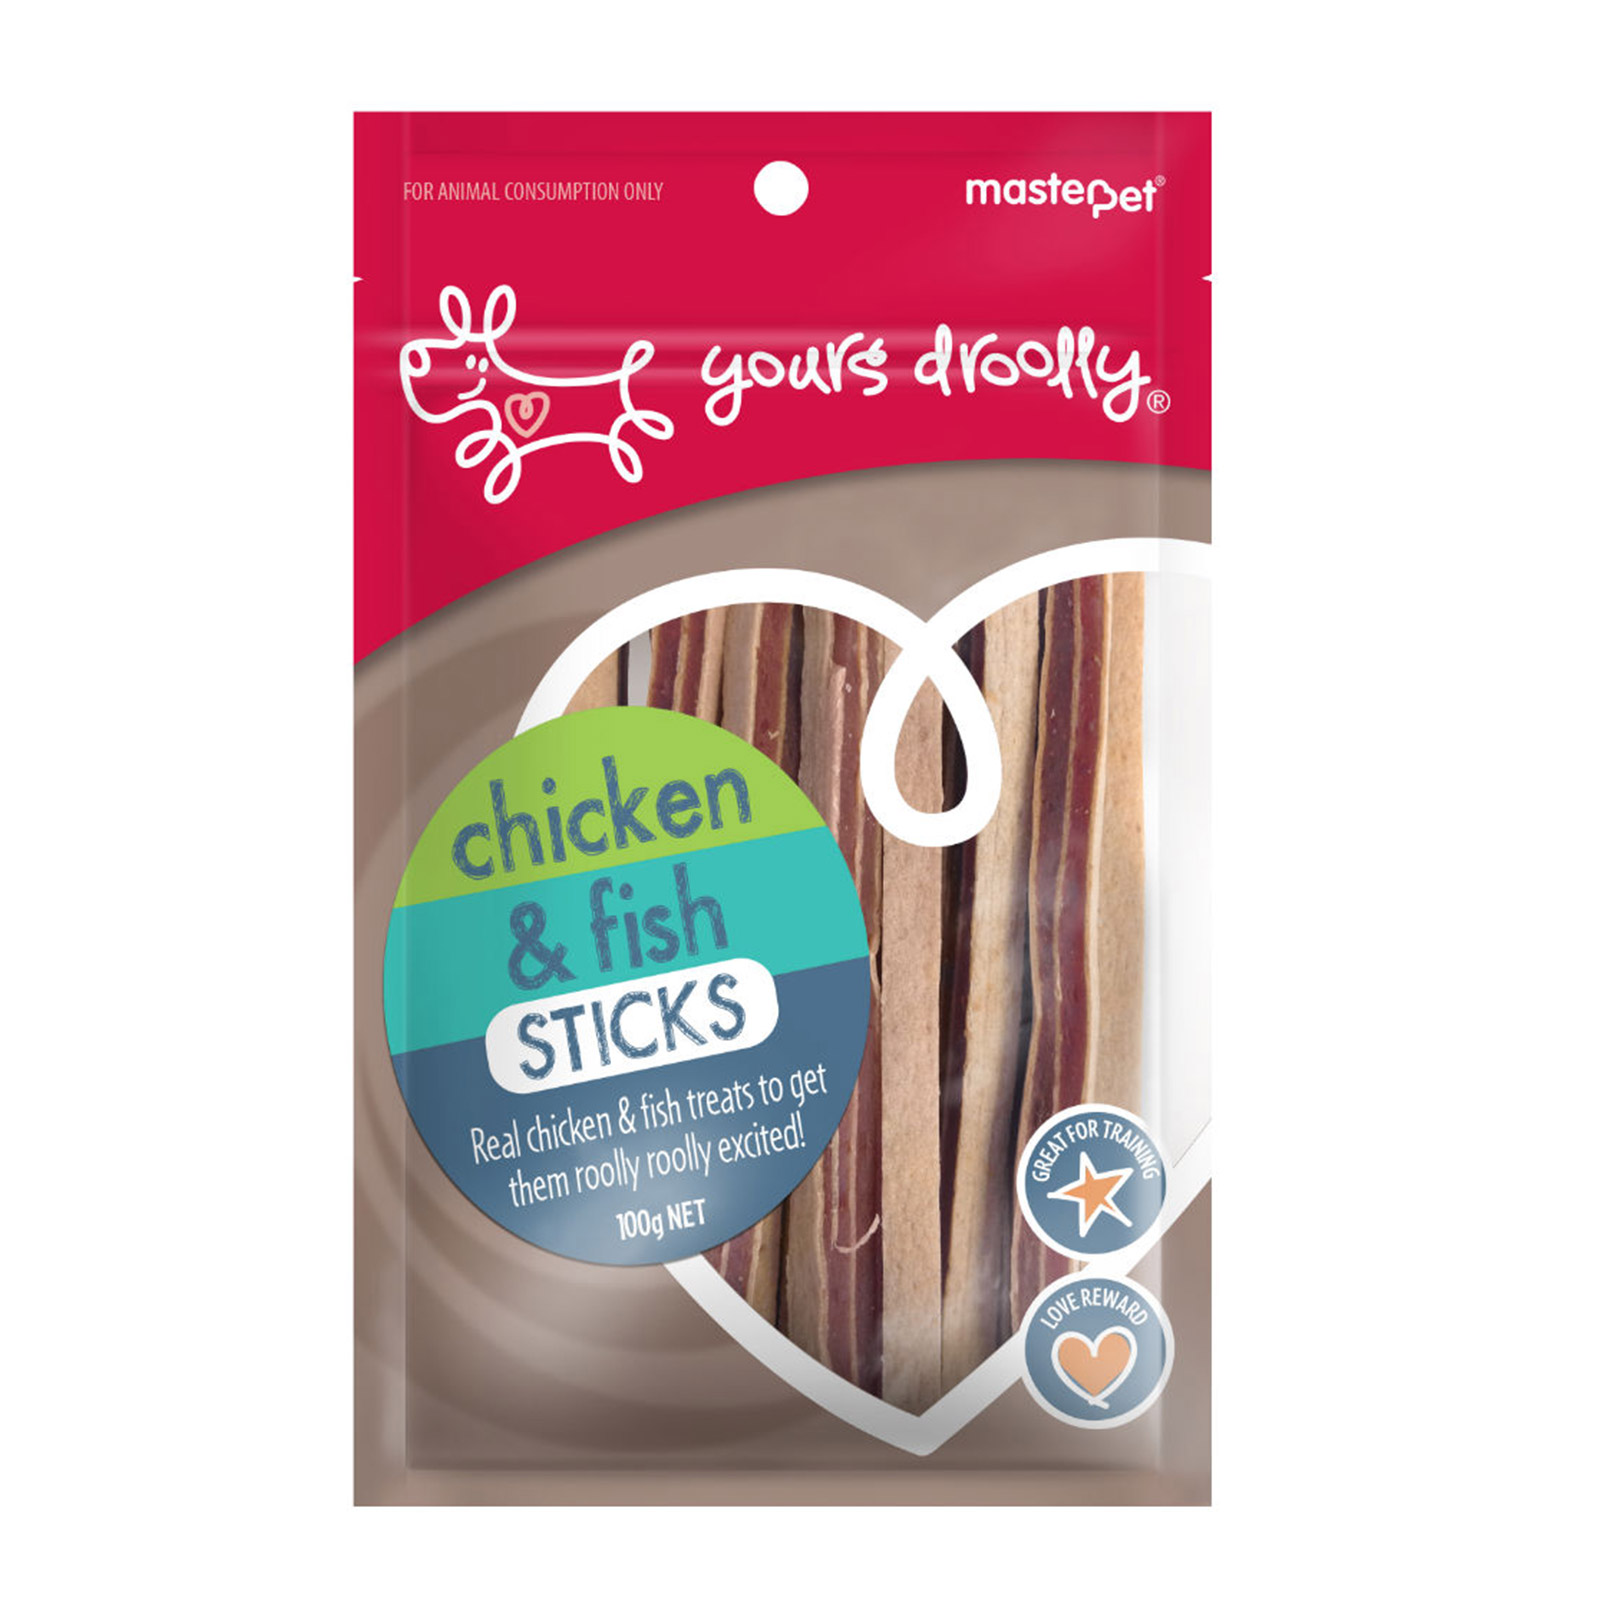 Yours Droolly Chicken and Fish Sticks Dog Treats for Dogs